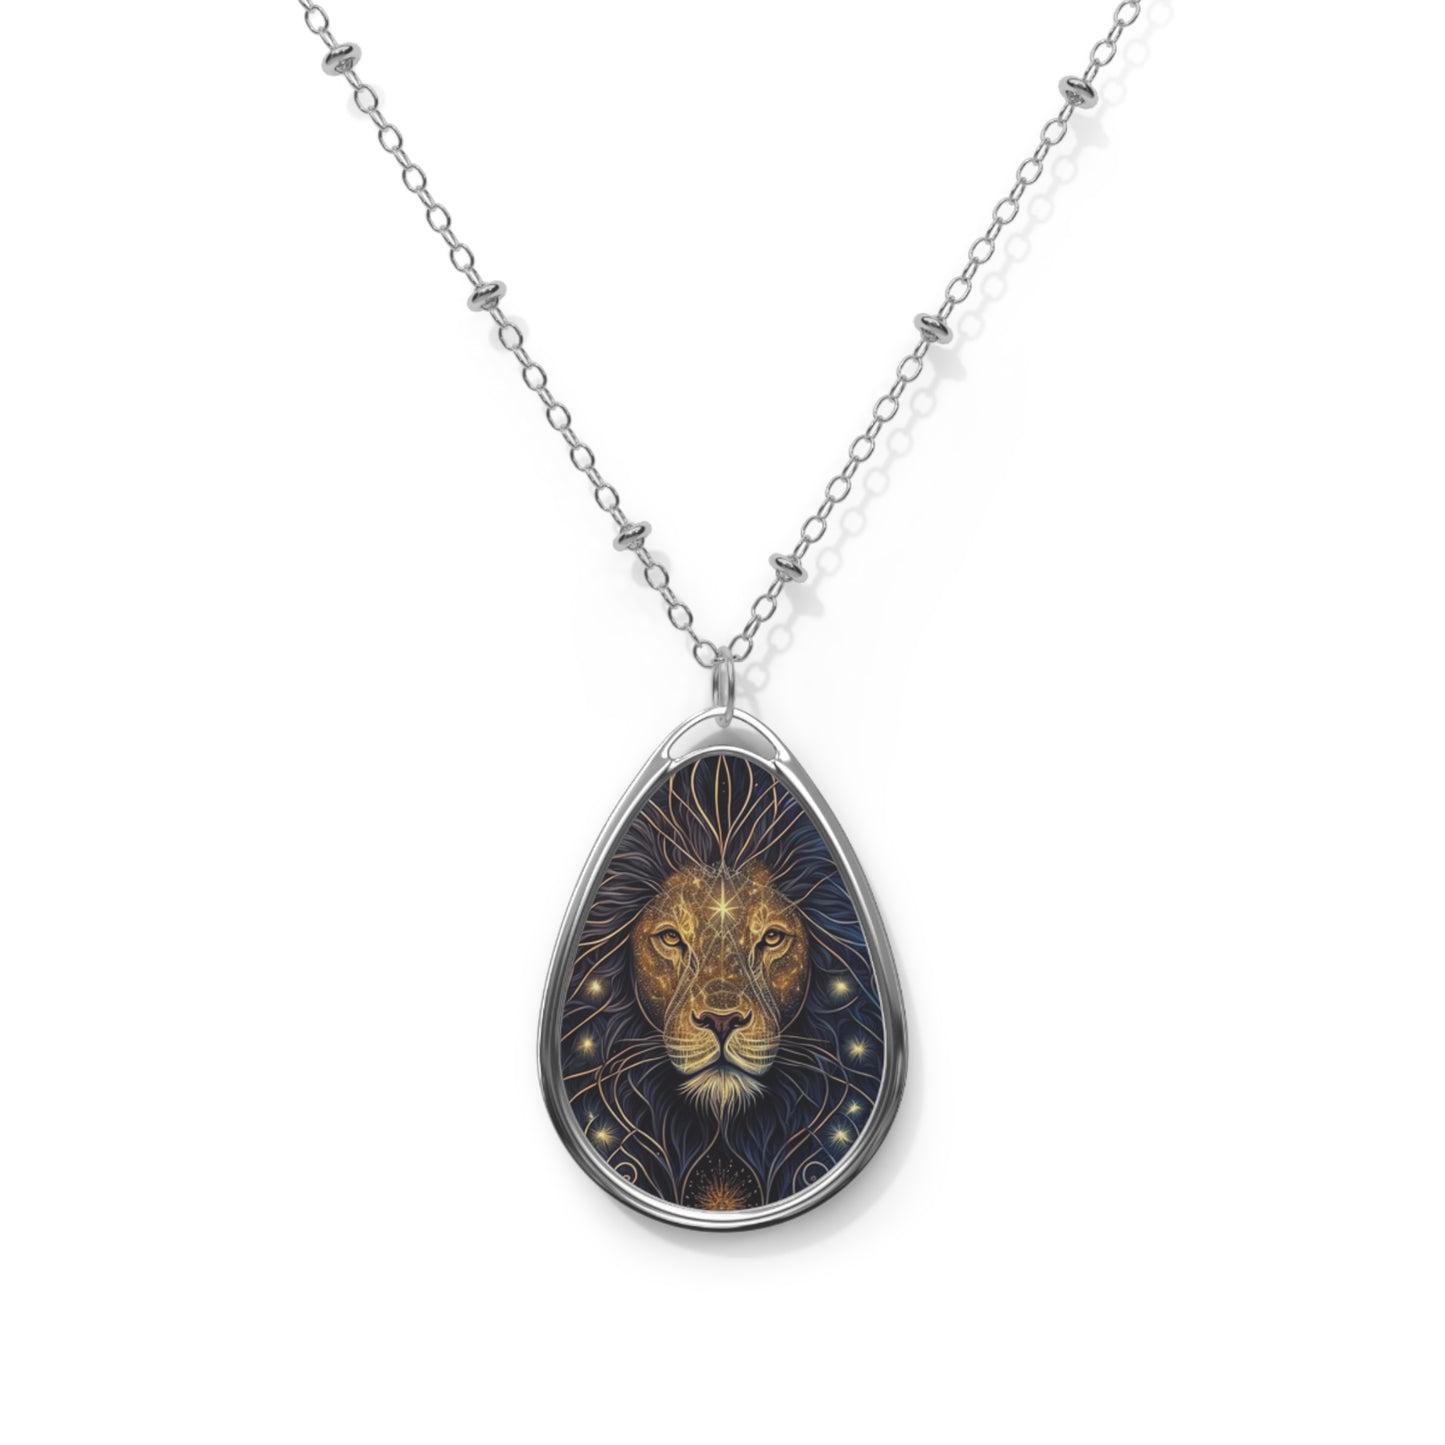 Leo Zodiac Sign ~ Lion in Black and Gold ~ Necklace & Oval Pendant With Chain